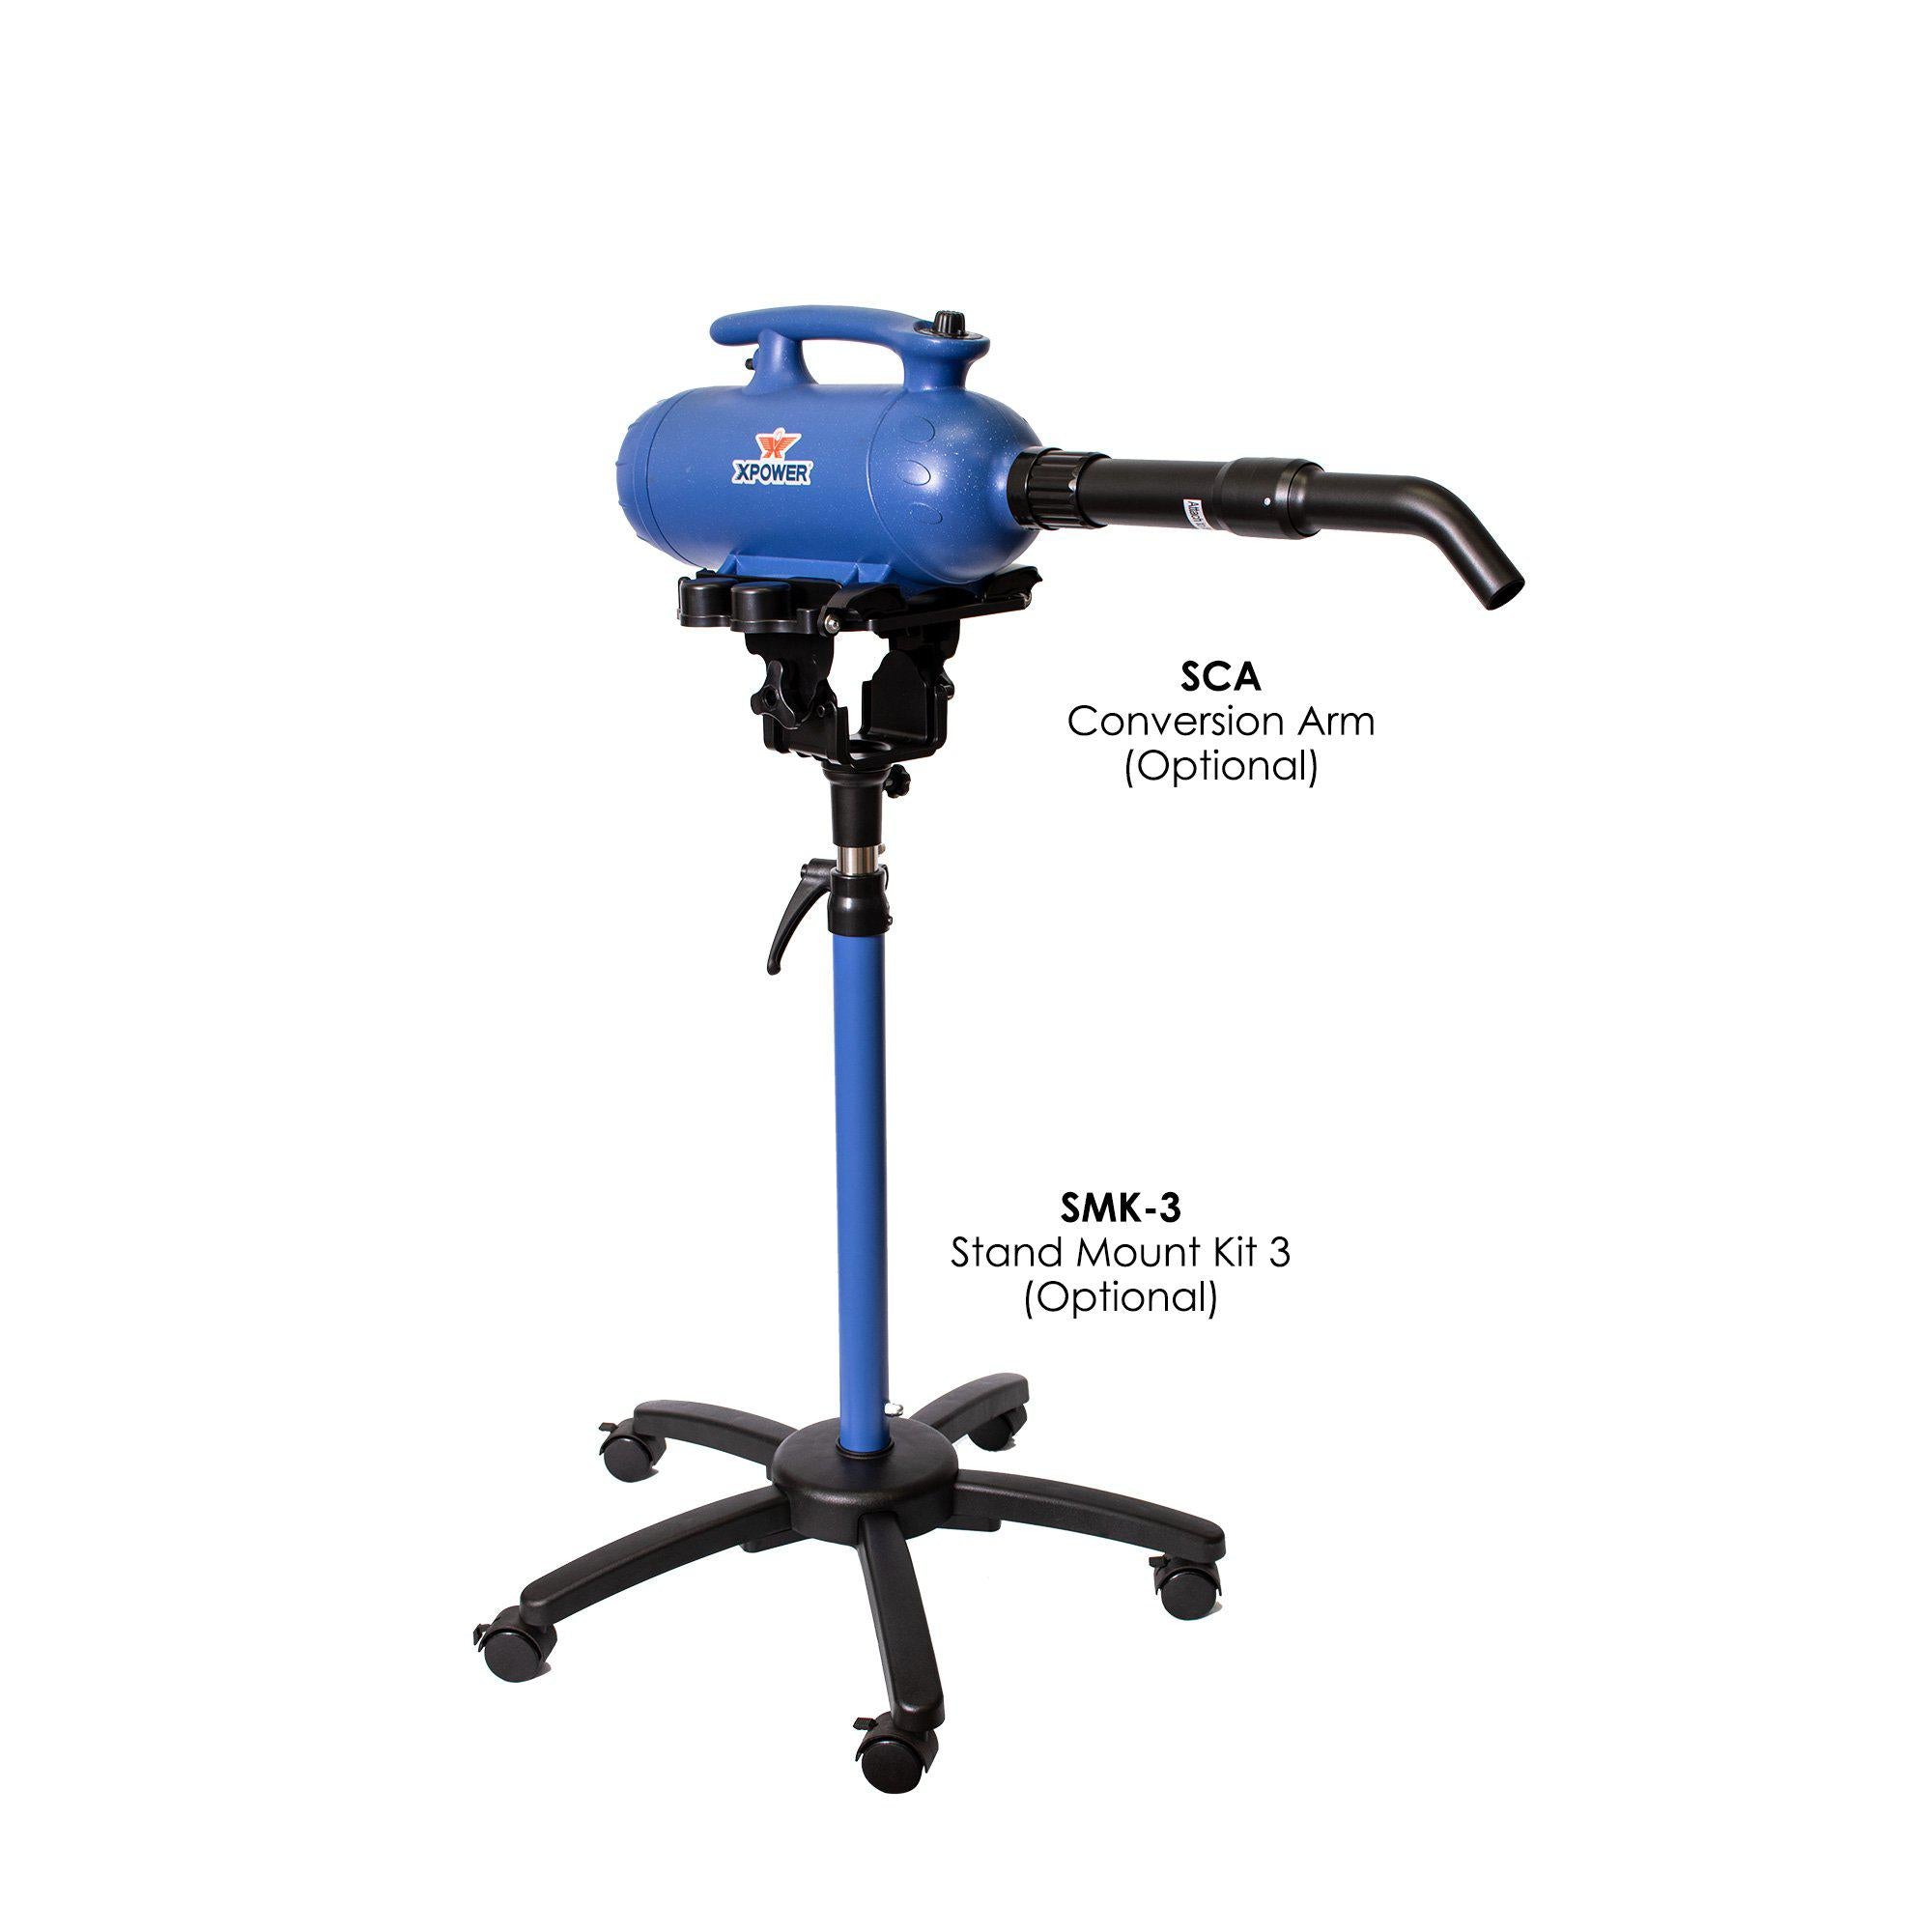 XPOWER B-25 Pro Force Plus Double Motor Dog Grooming Force Pet Dryer (4 HP)